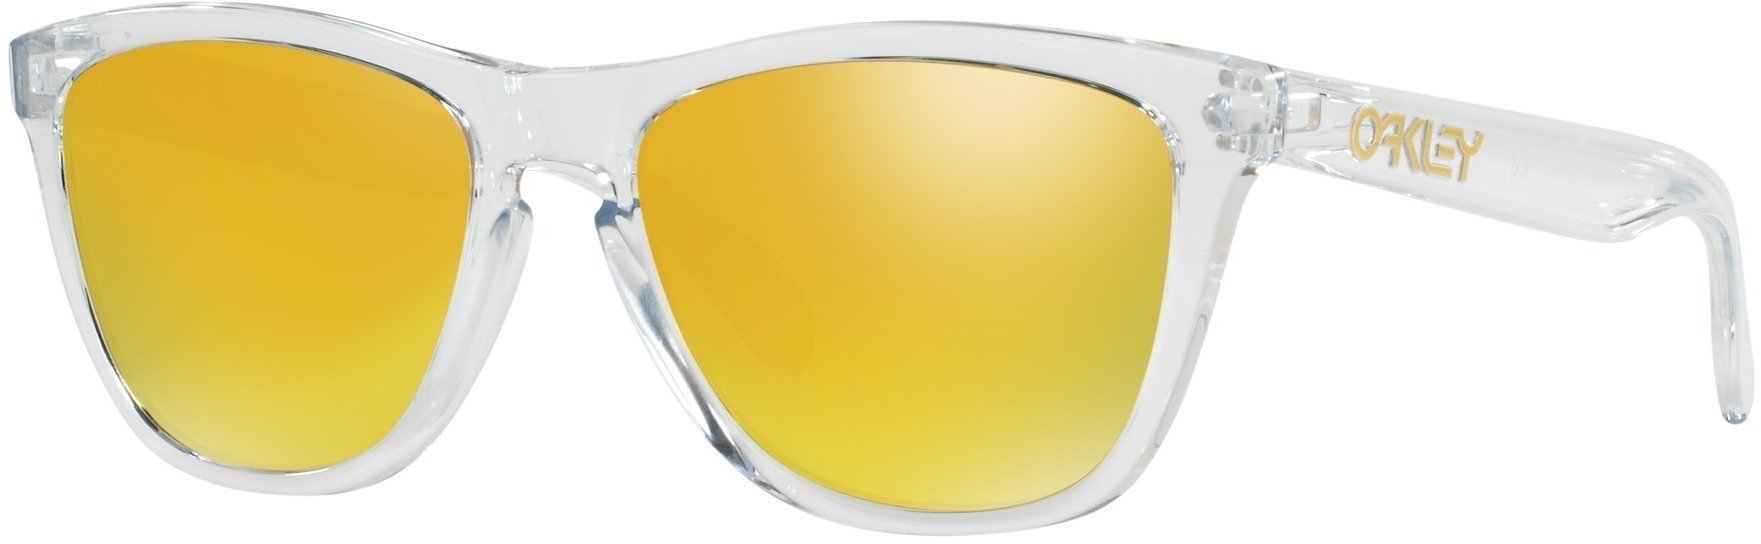 Lunettes de sport Oakley Frogskins Crystal Collection 24k Iridium Polished Clear